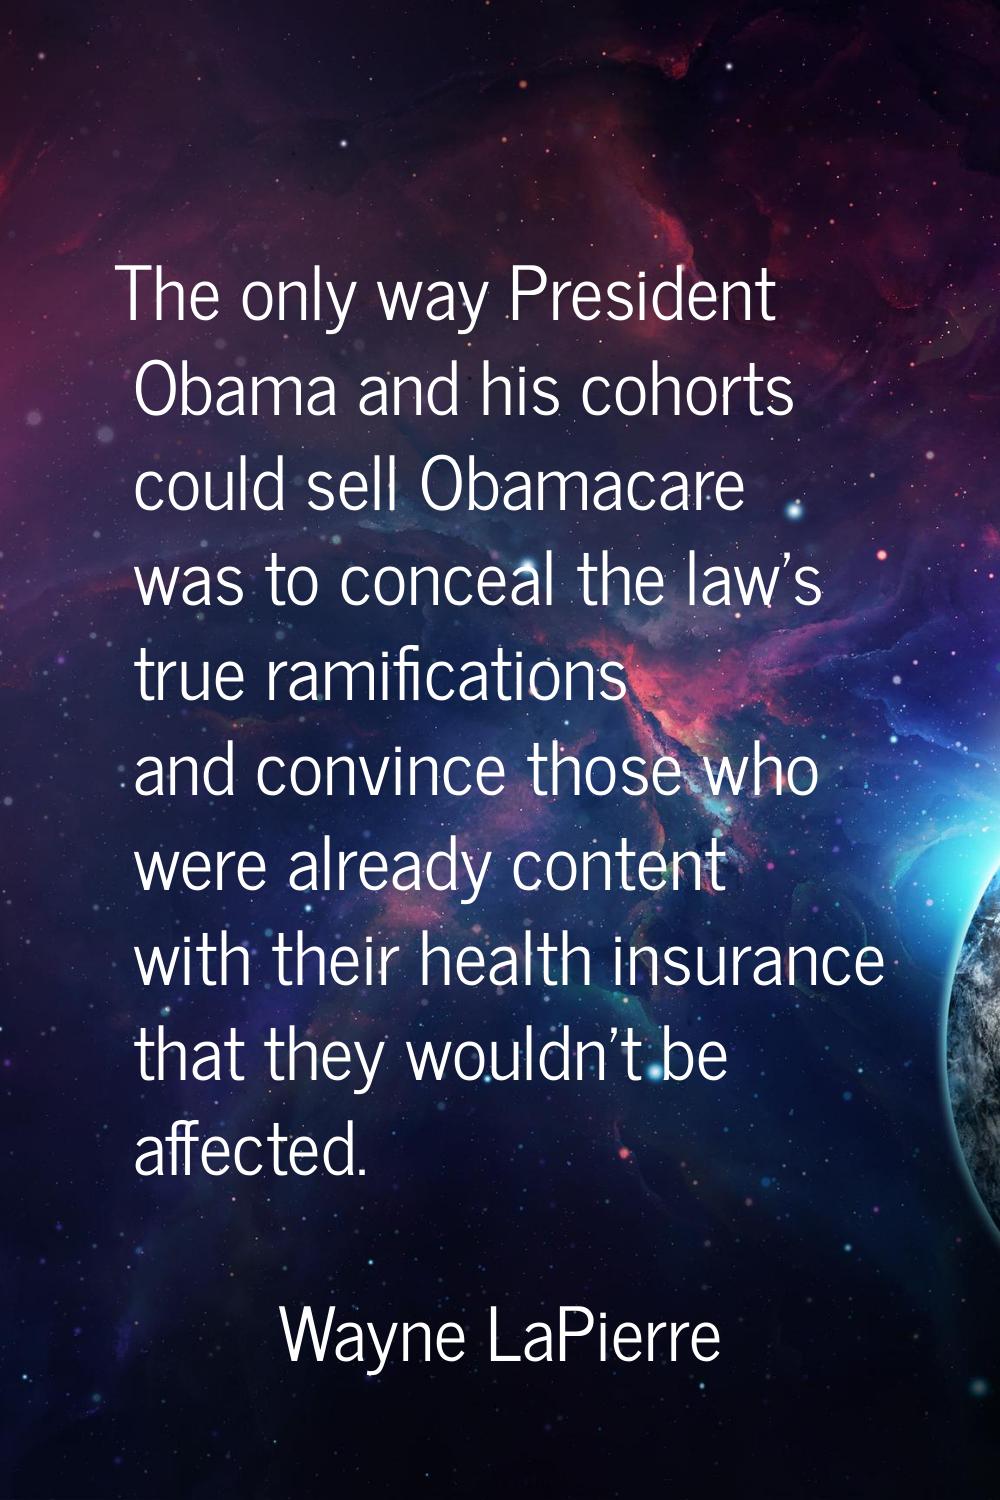 The only way President Obama and his cohorts could sell Obamacare was to conceal the law's true ram